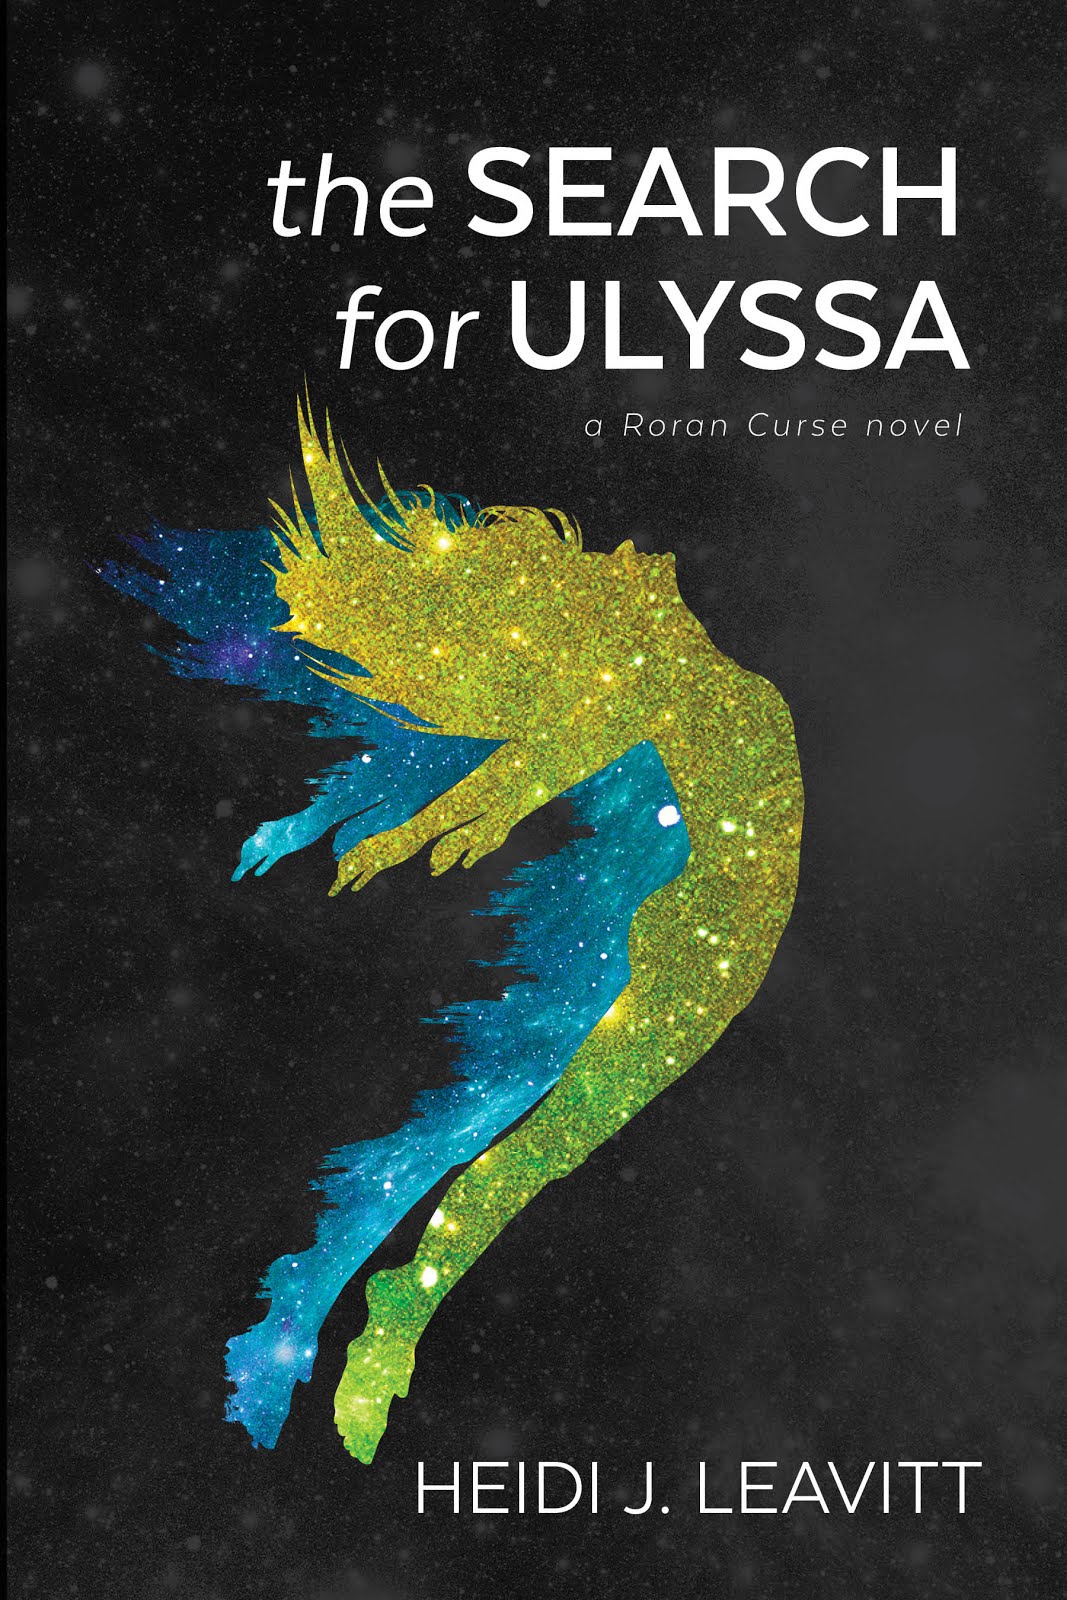 The Search for Ulyssa